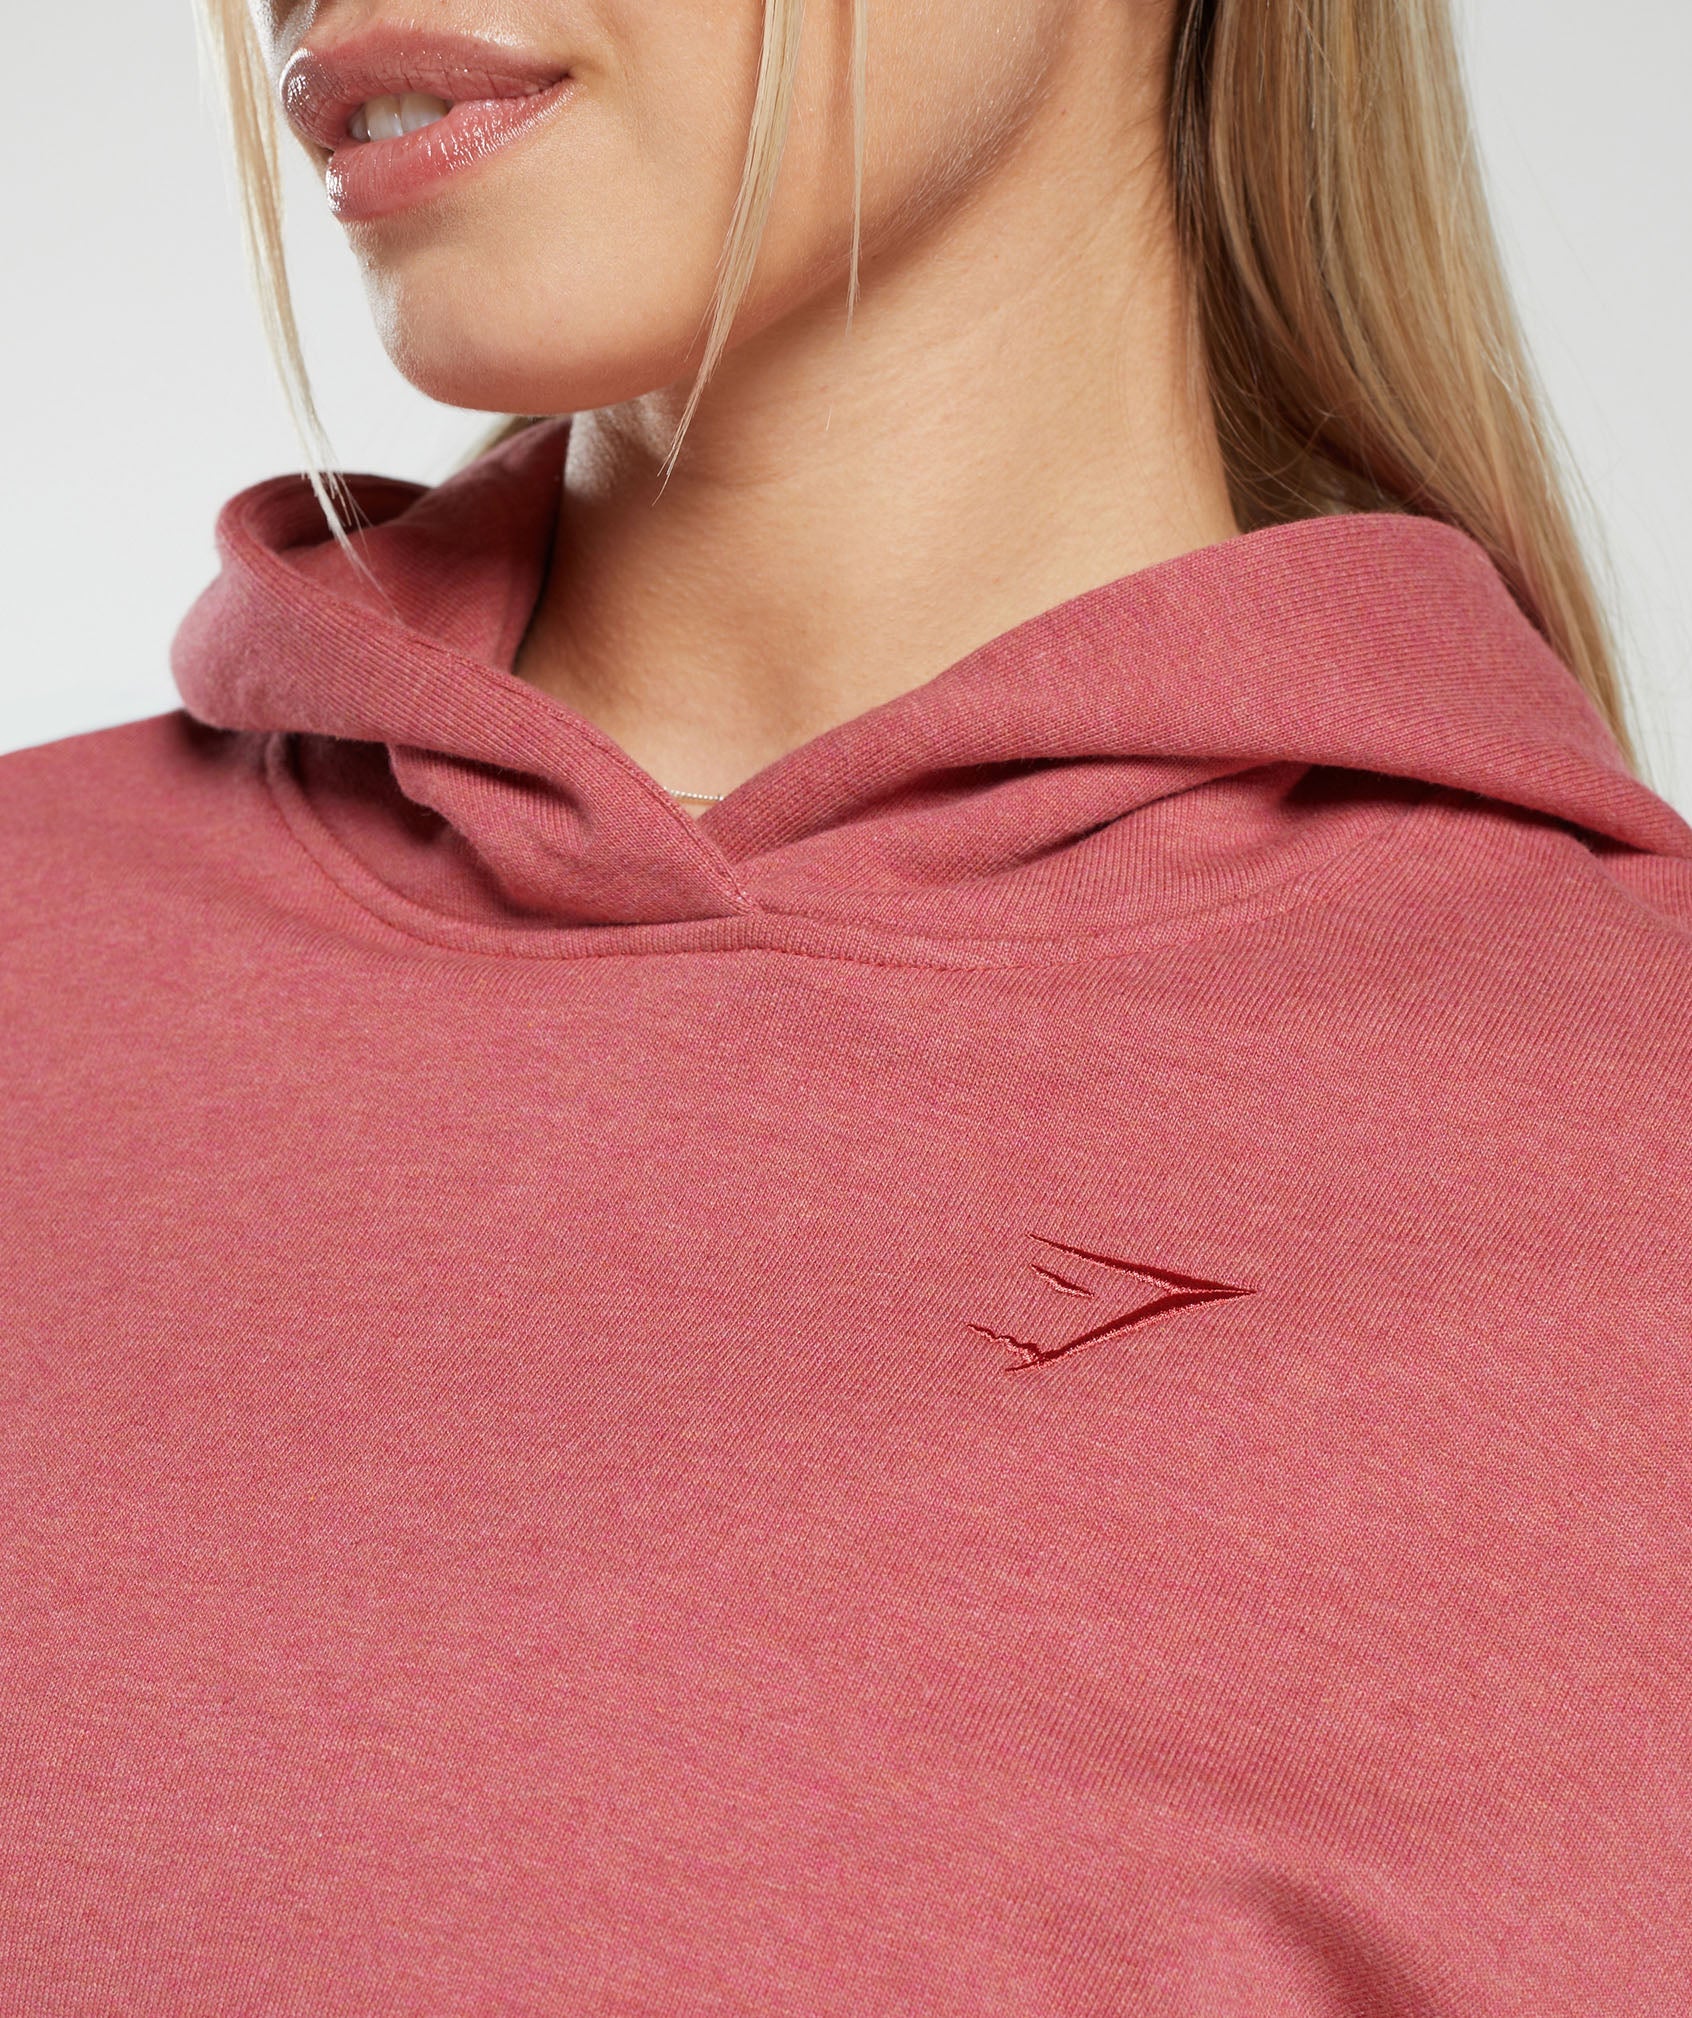 Rest Day Sweats Hoodie in Heritage Pink Marl - view 5